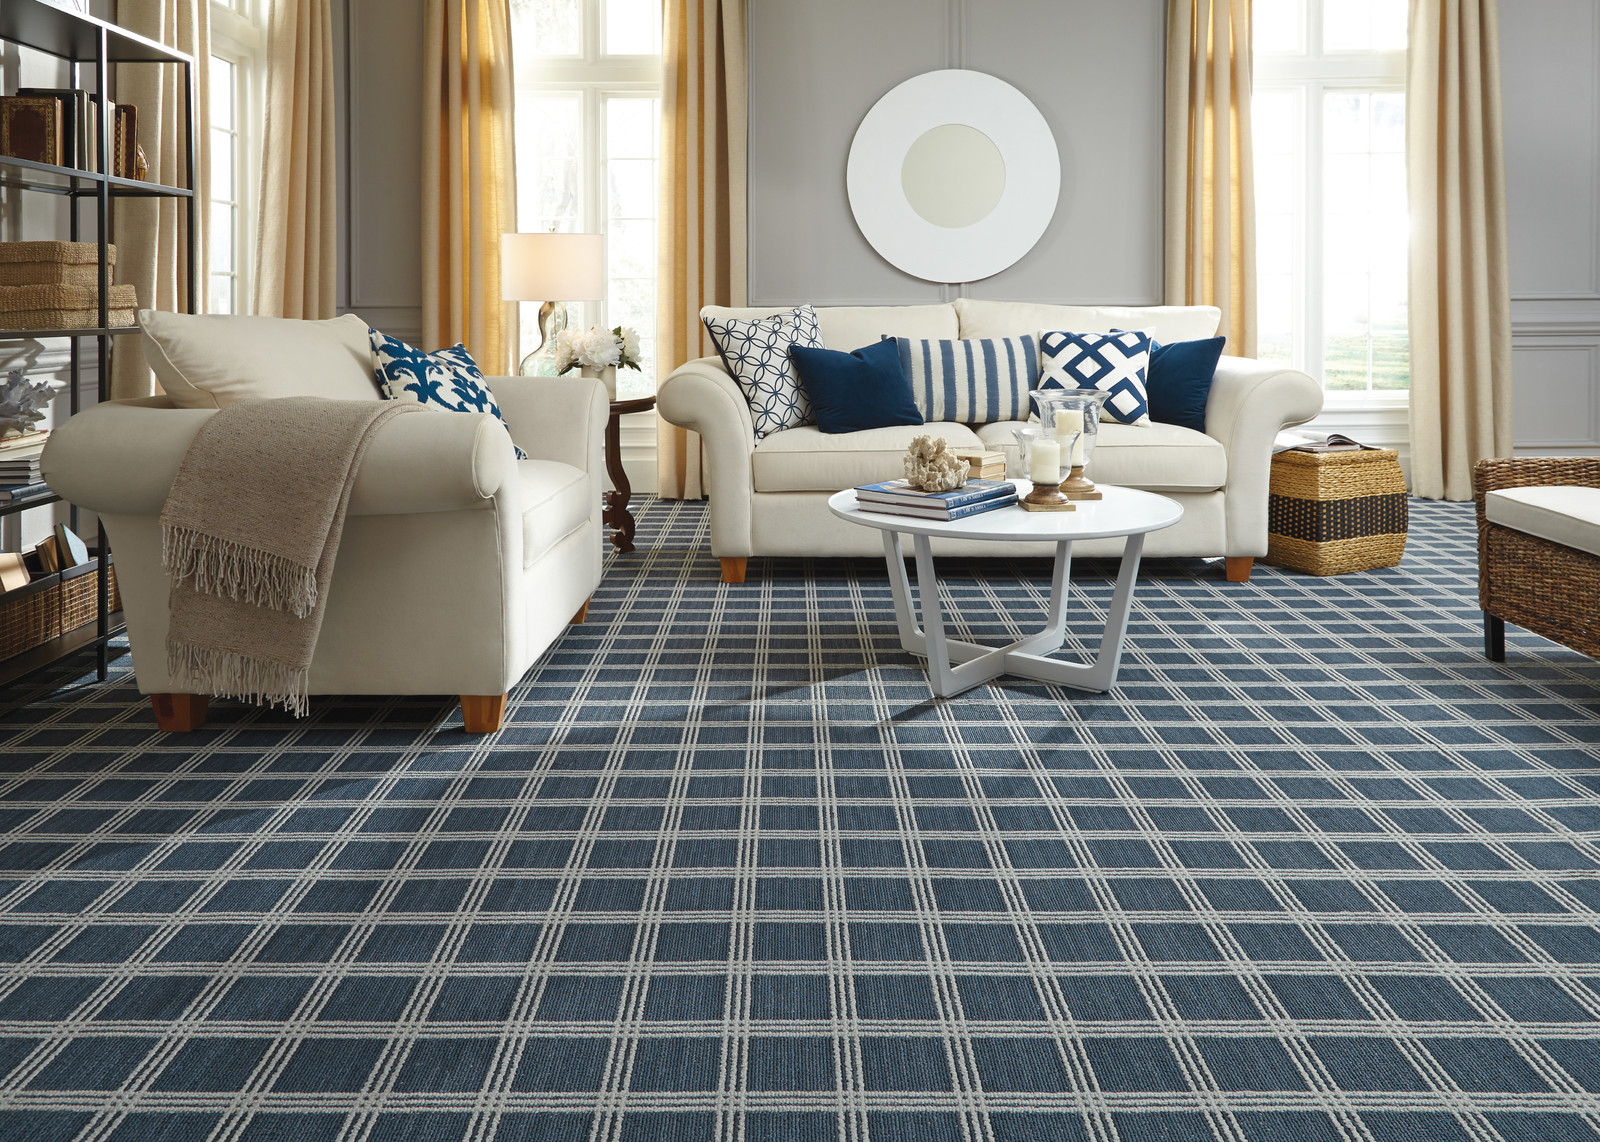 Spruce Blue Square Patterned Carpet Flooring To Match Light Grey Walls In A Traditional Living Room 